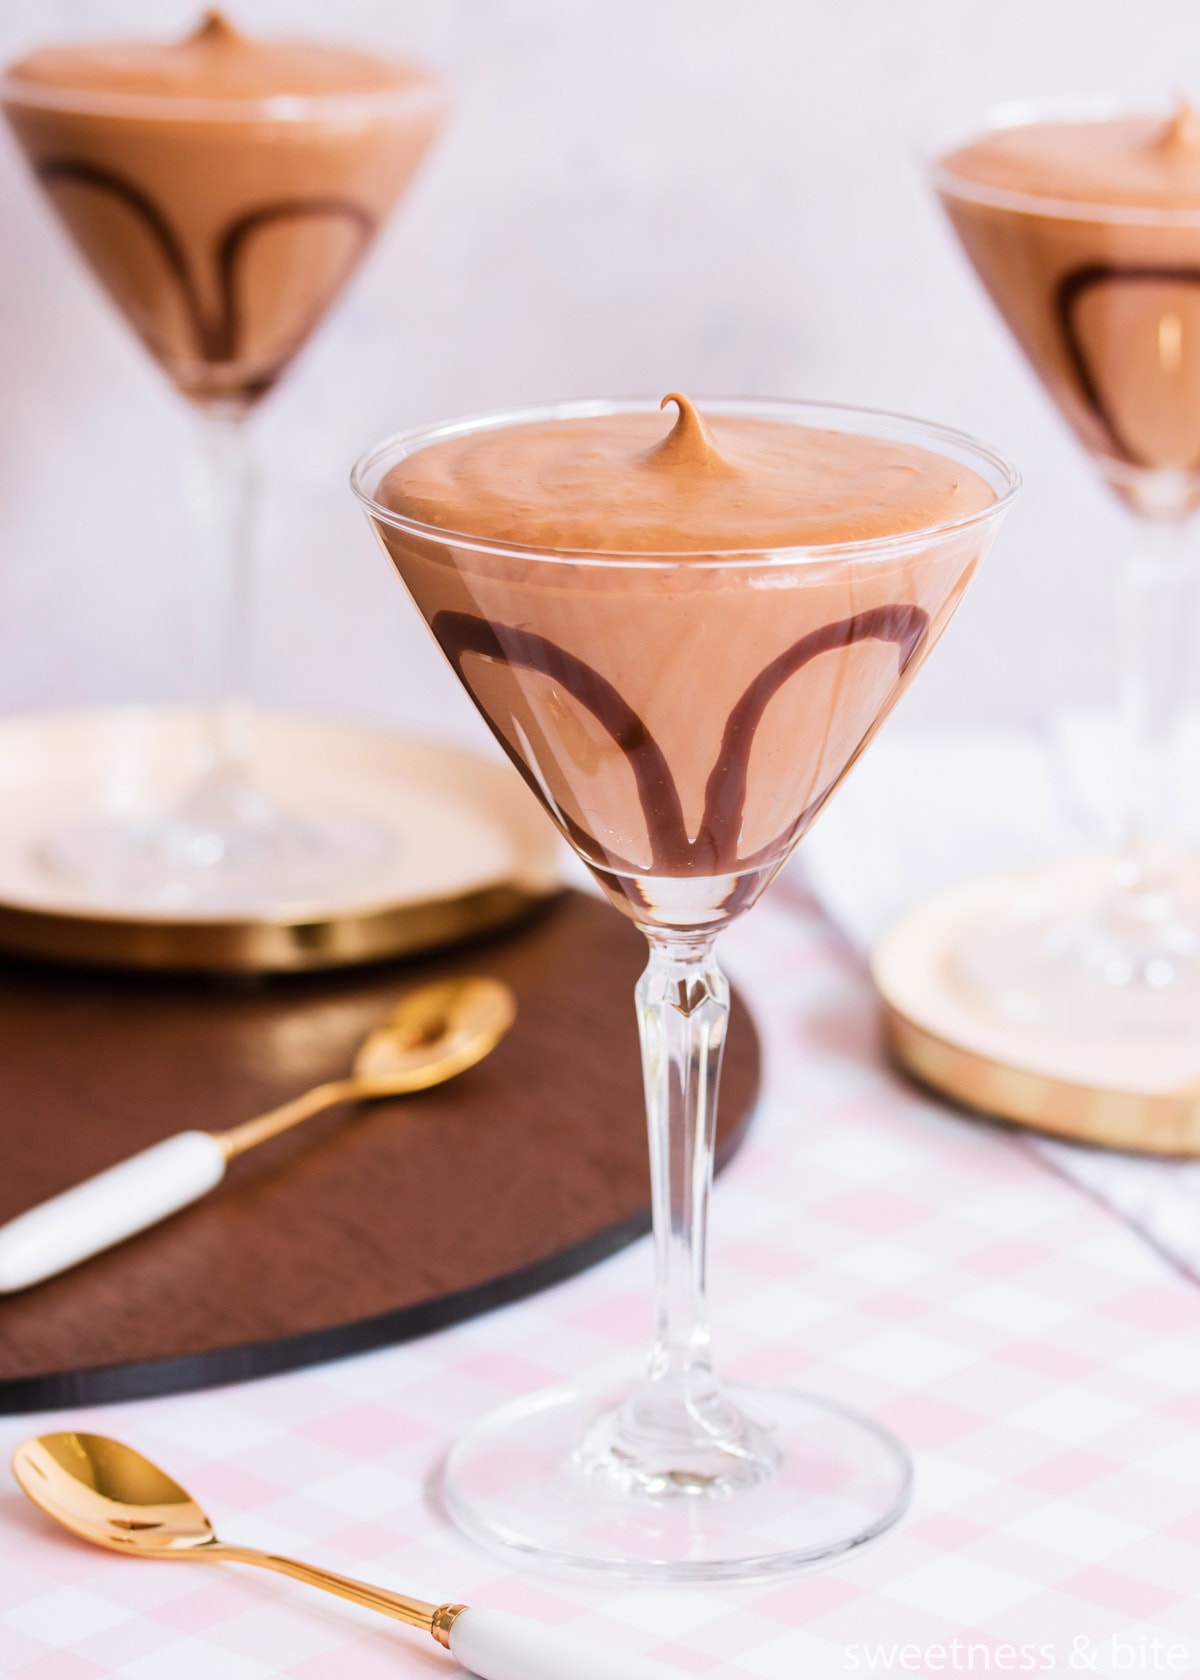 Close up of a glass of mousse showing the ganache decoration.